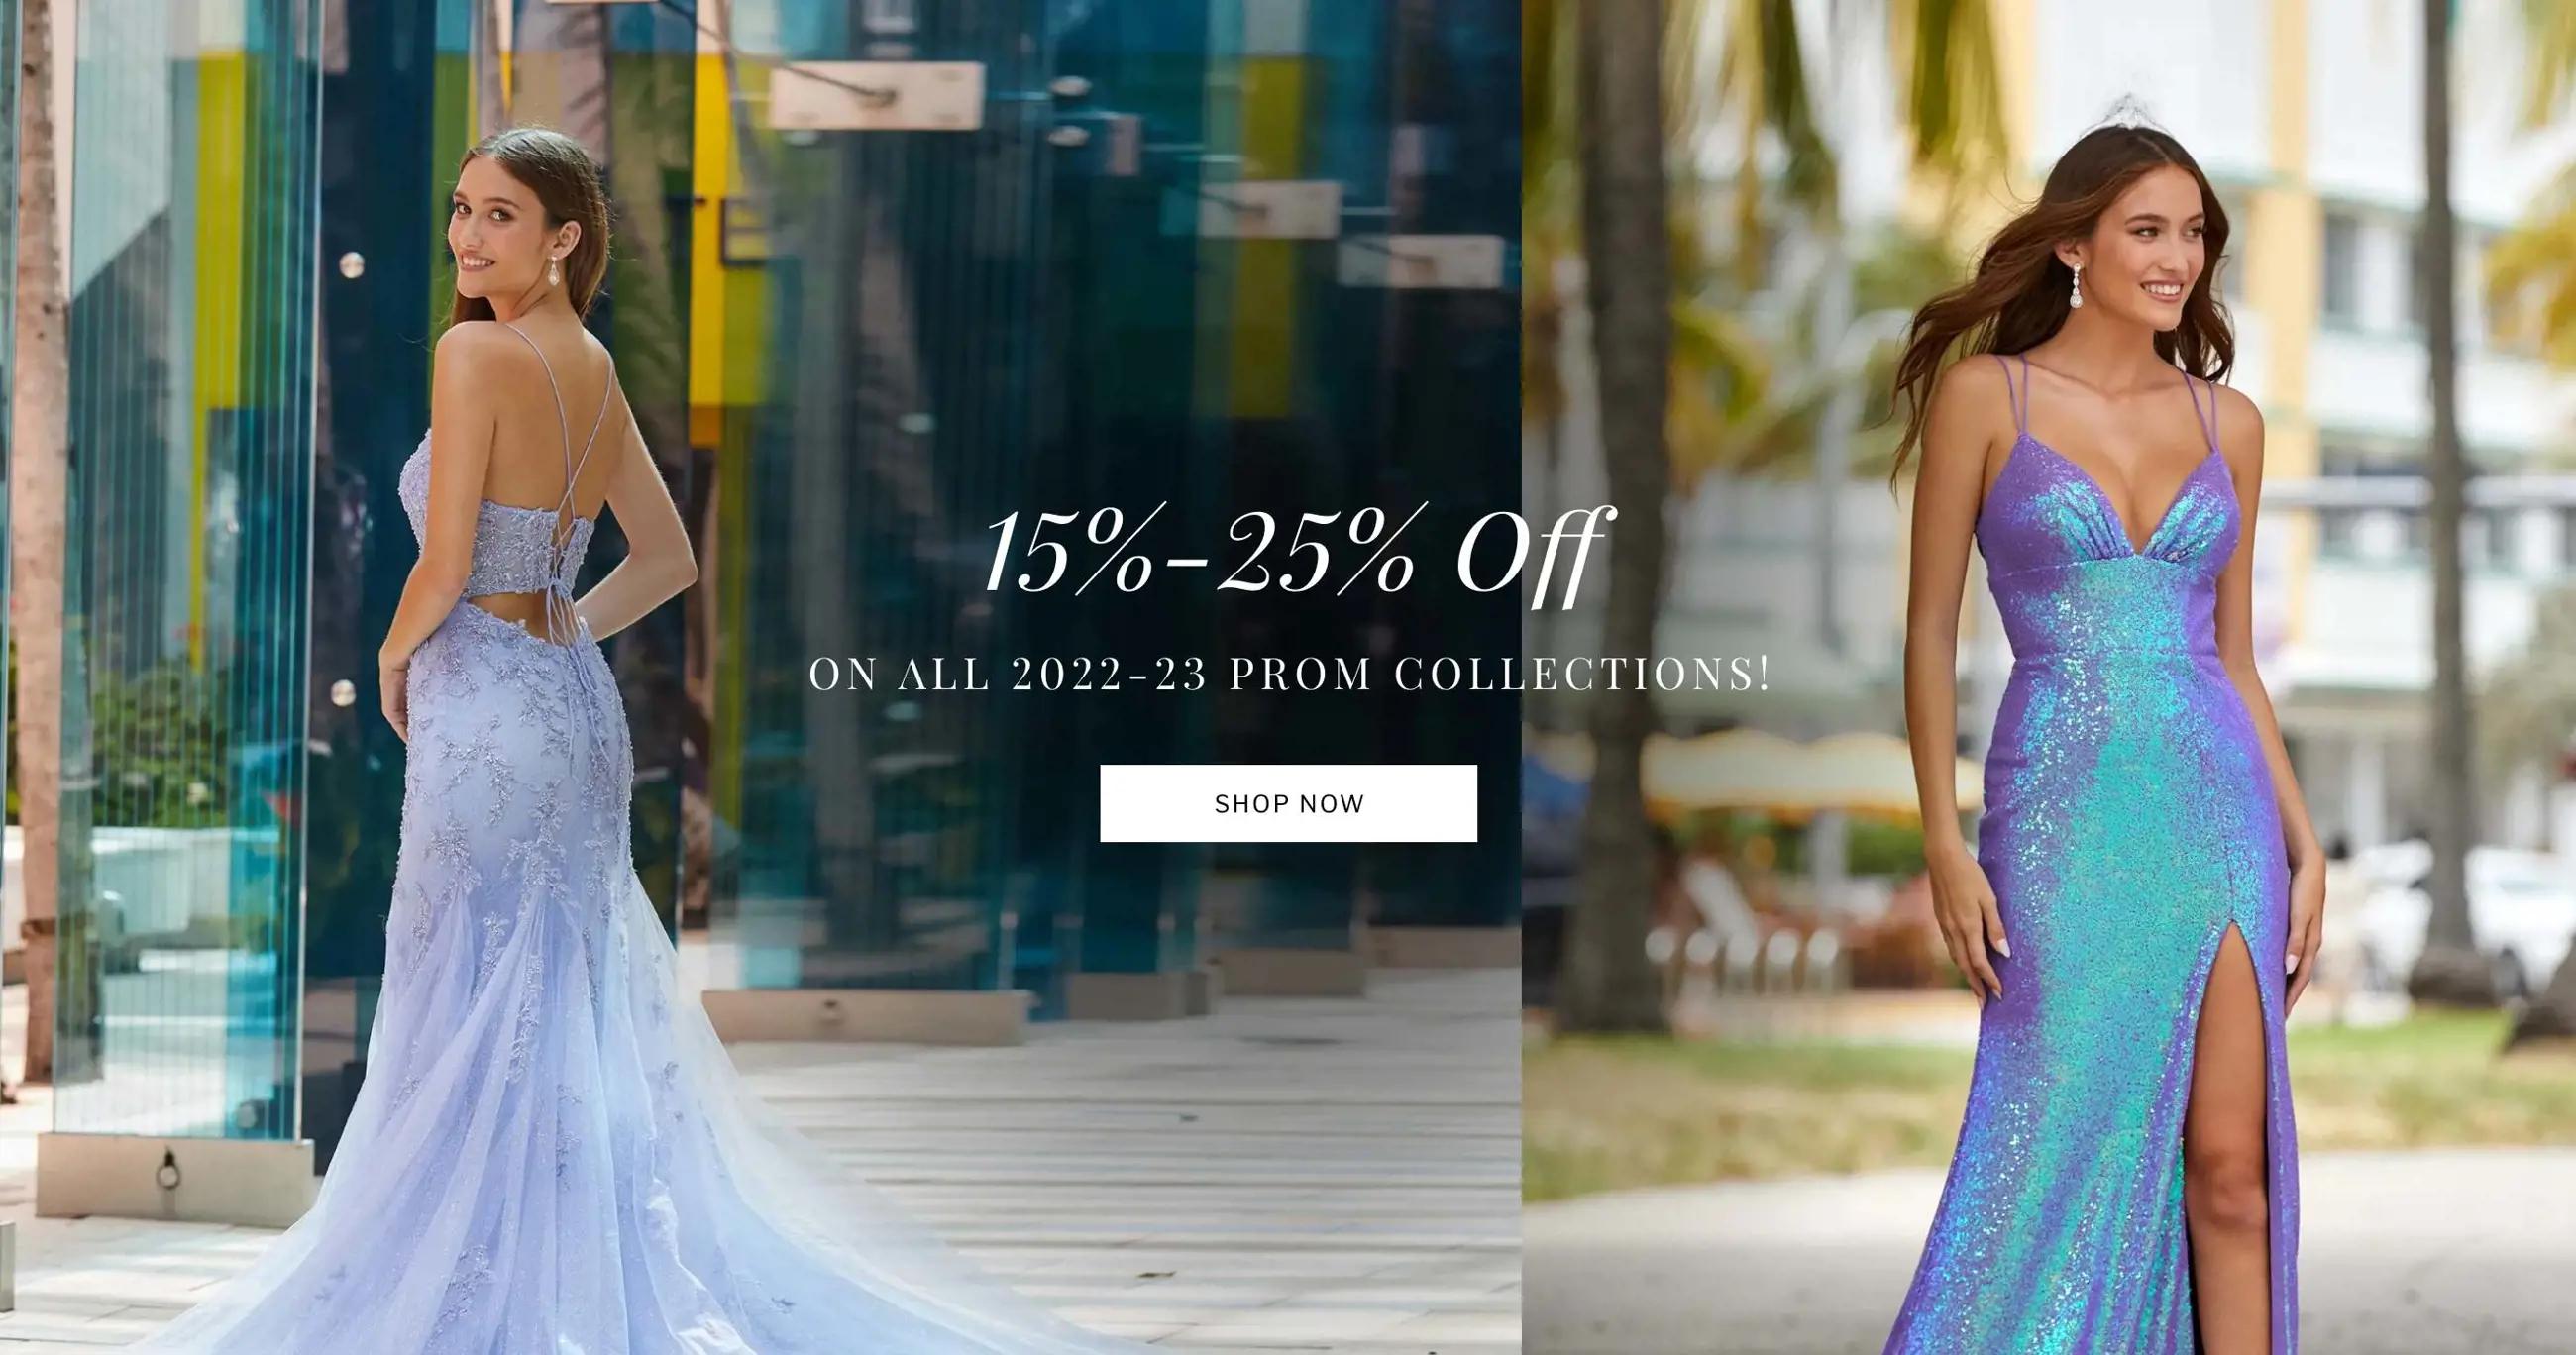 Banner Promoting Prom Dress Promotion